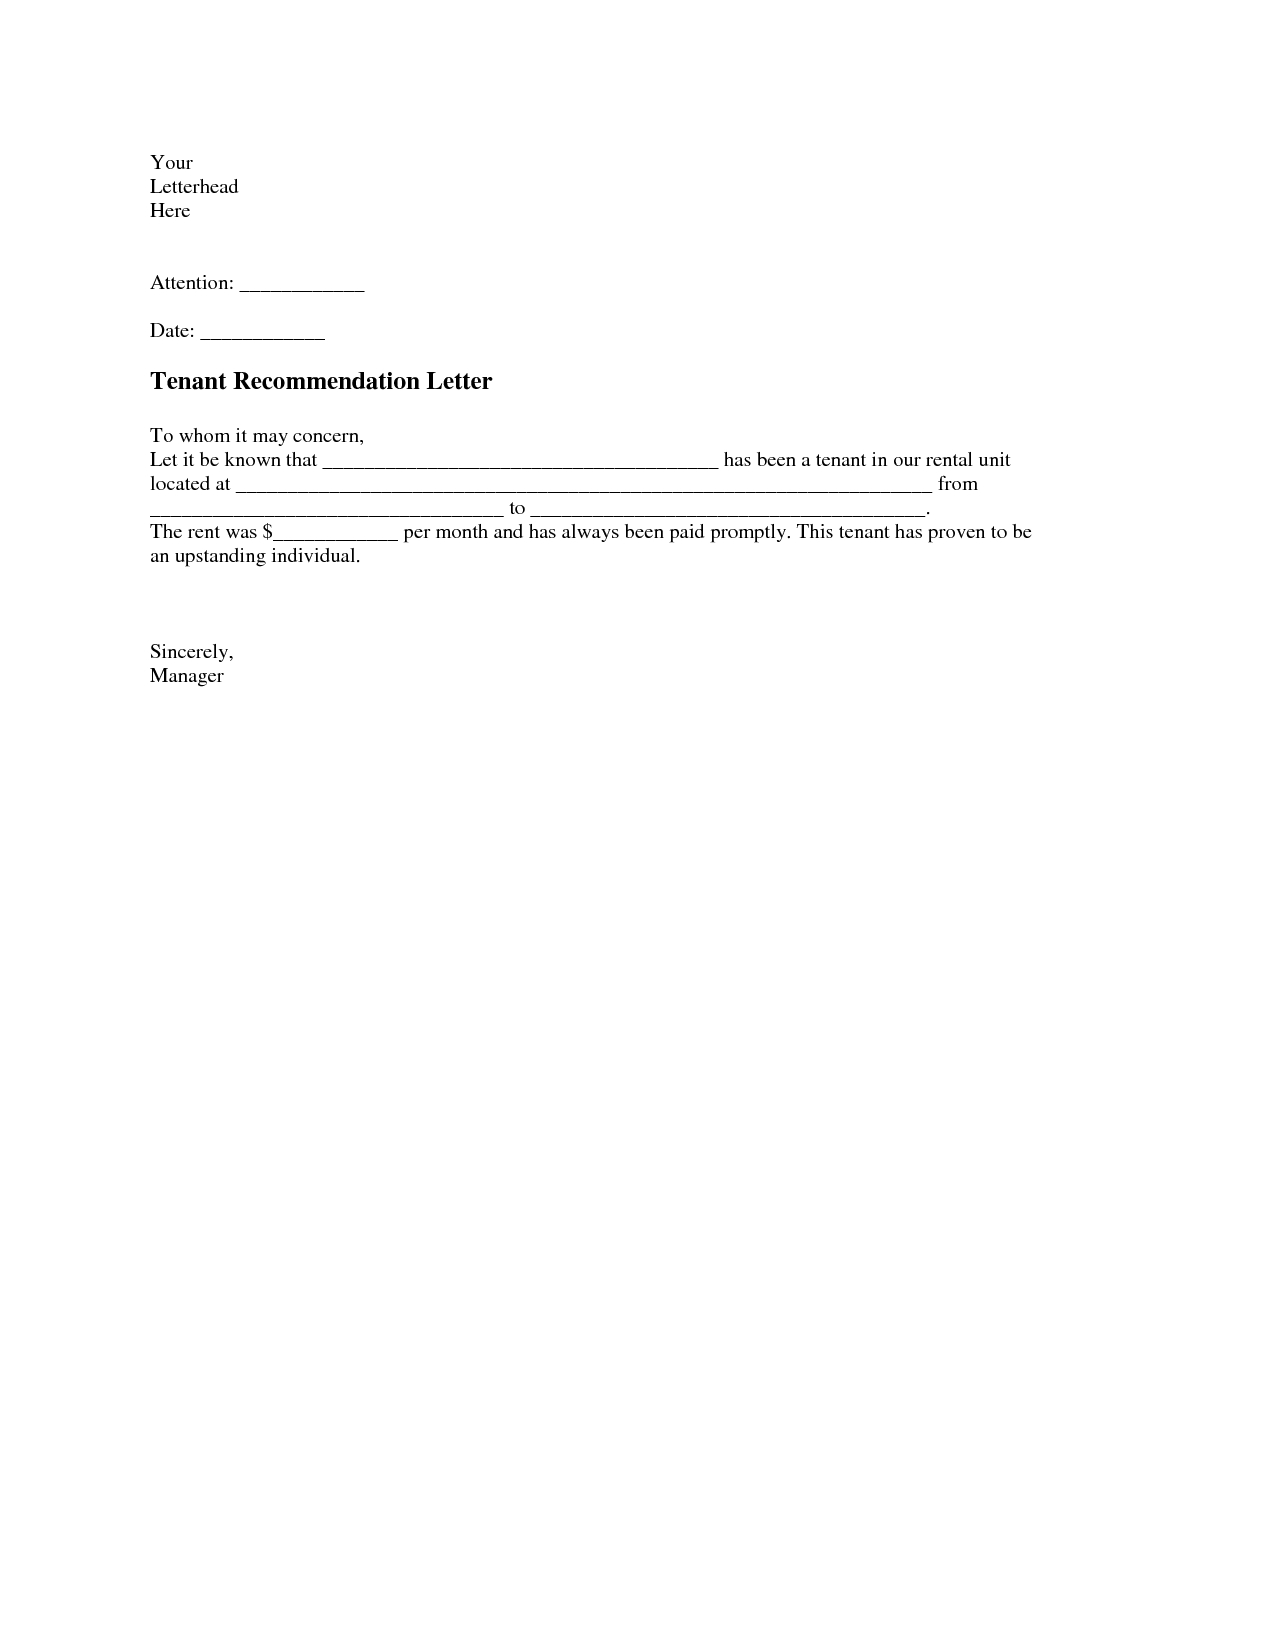 Tenant Recommendation Letter A Tenant Recommendation within dimensions 1275 X 1650